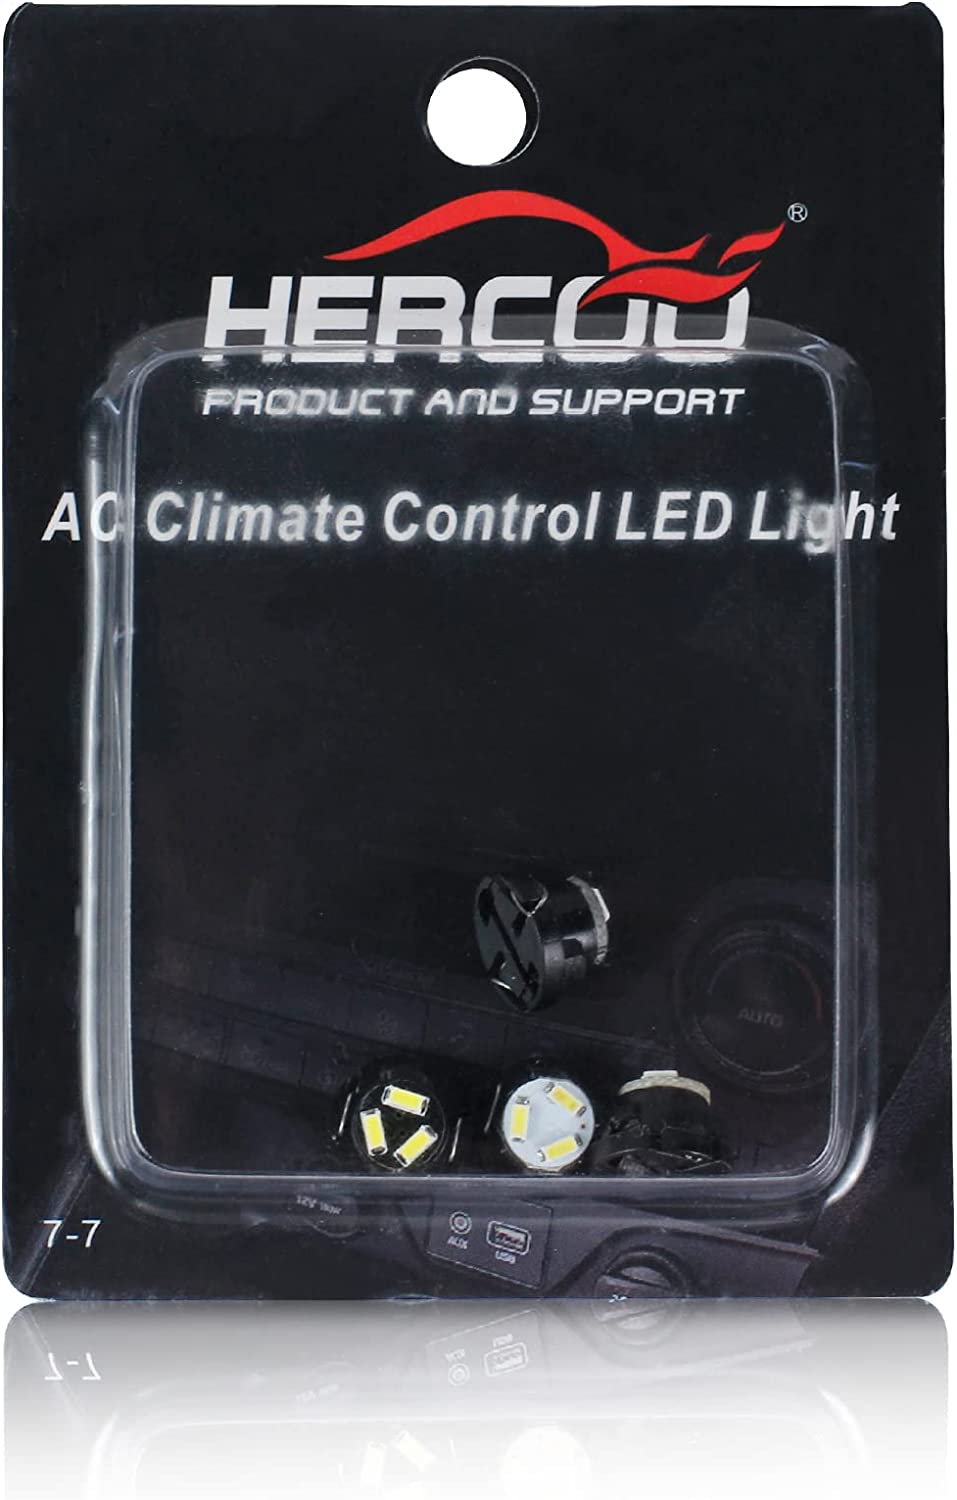 HERCOO LED Lights Bulbs Kit of AC Climate Heater Control Compatible with 2003-2008 Dodge Ram 1500 2500 3500 Aftermarket Replacement